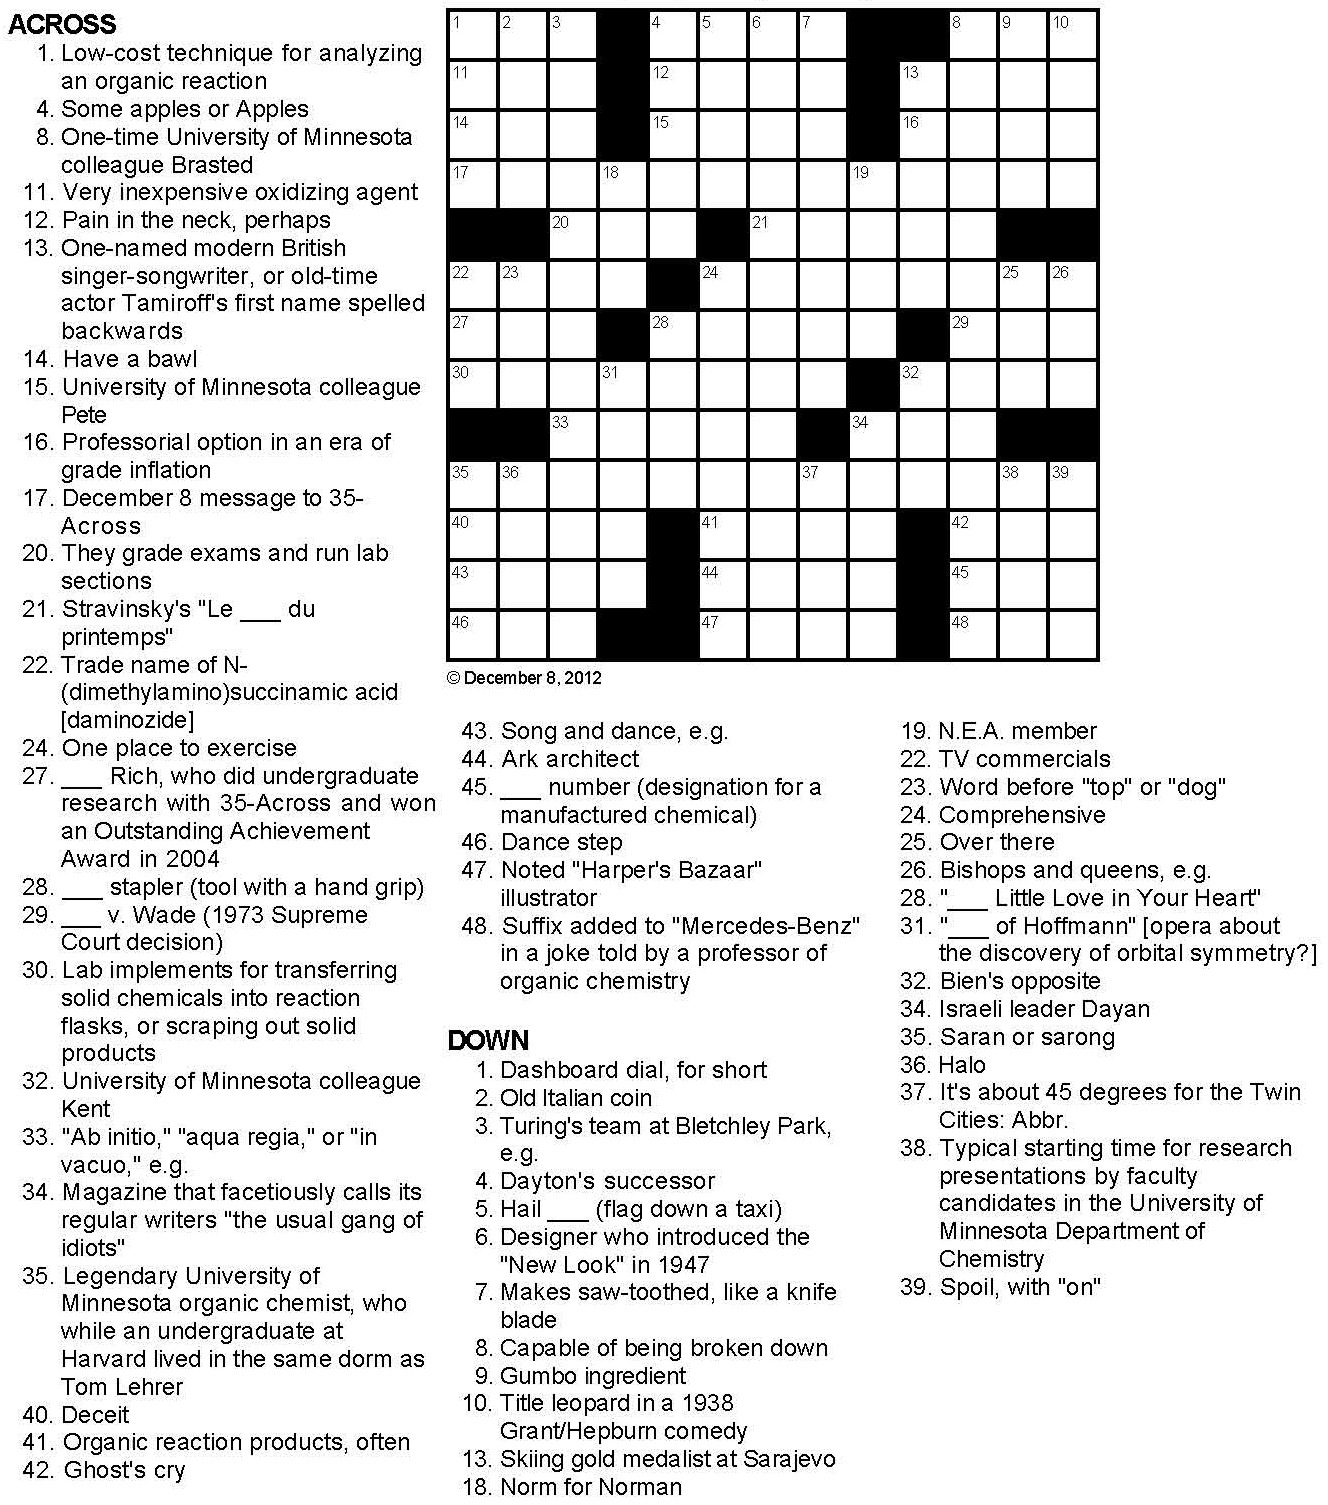 Marvelous Crossword Puzzles Easy Printable Free Org Chas s Board